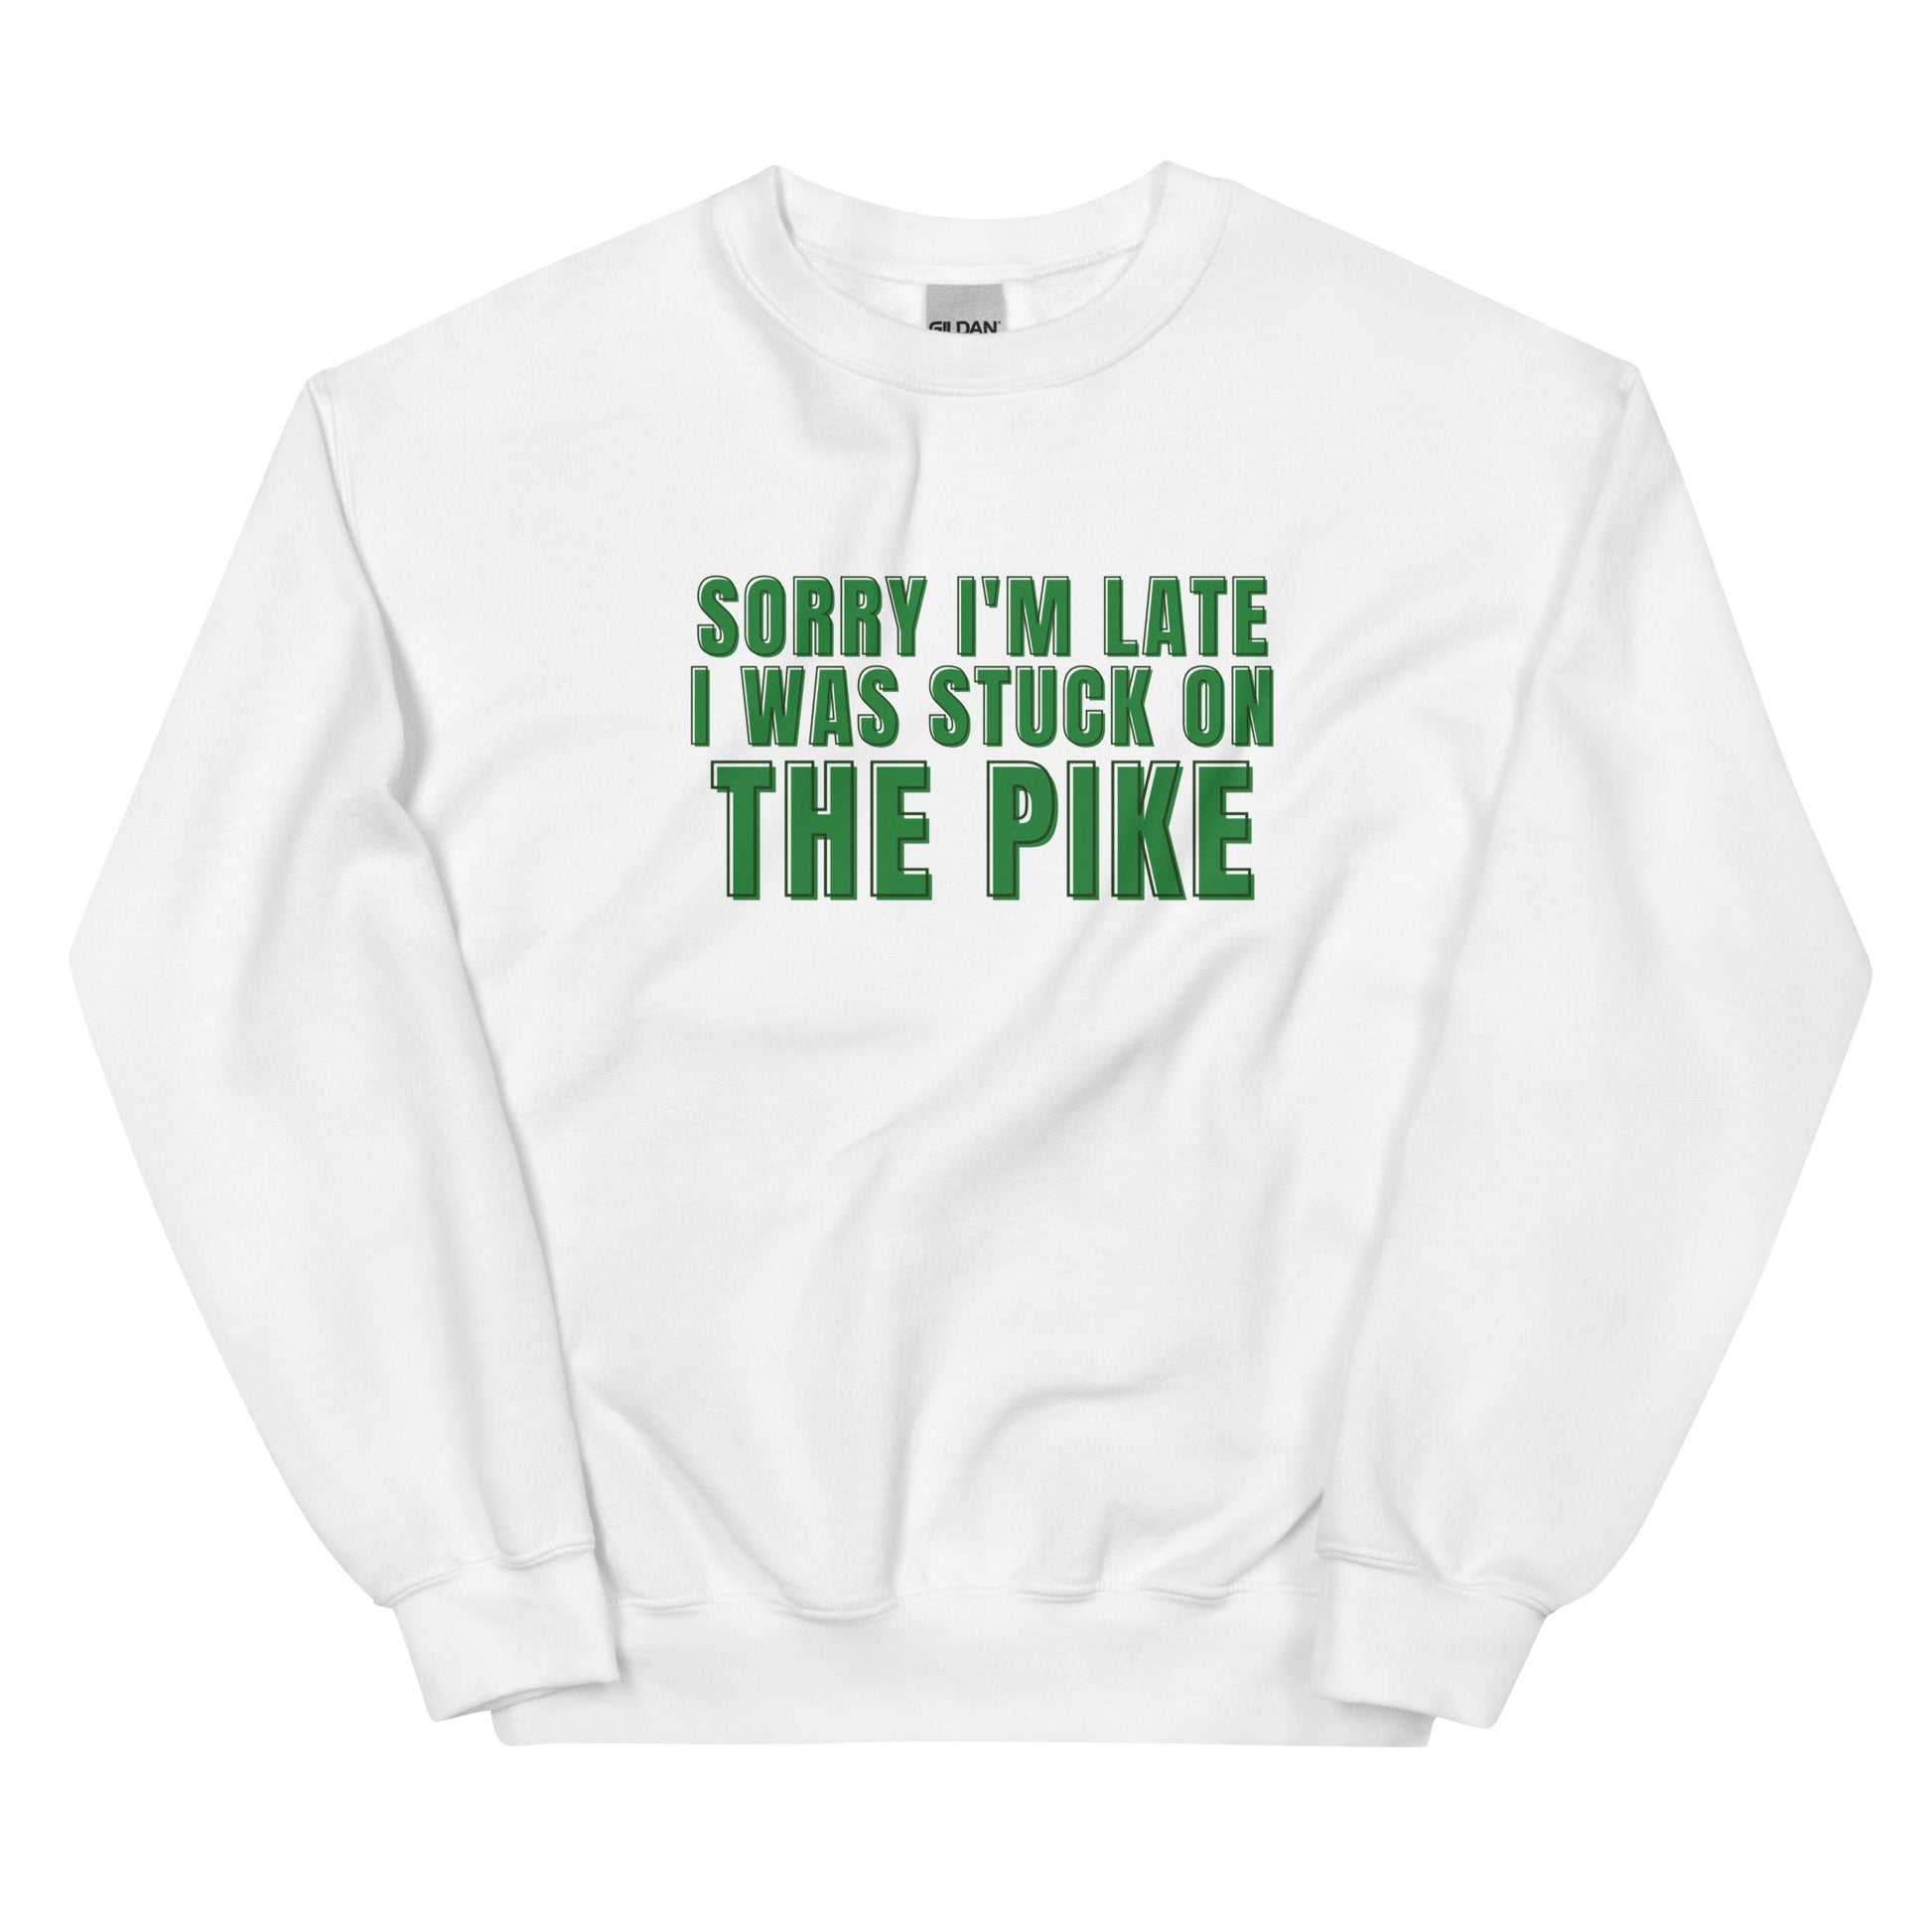 white crewneck that says "sorry i'm late i was stuck on the pike" in green lettering